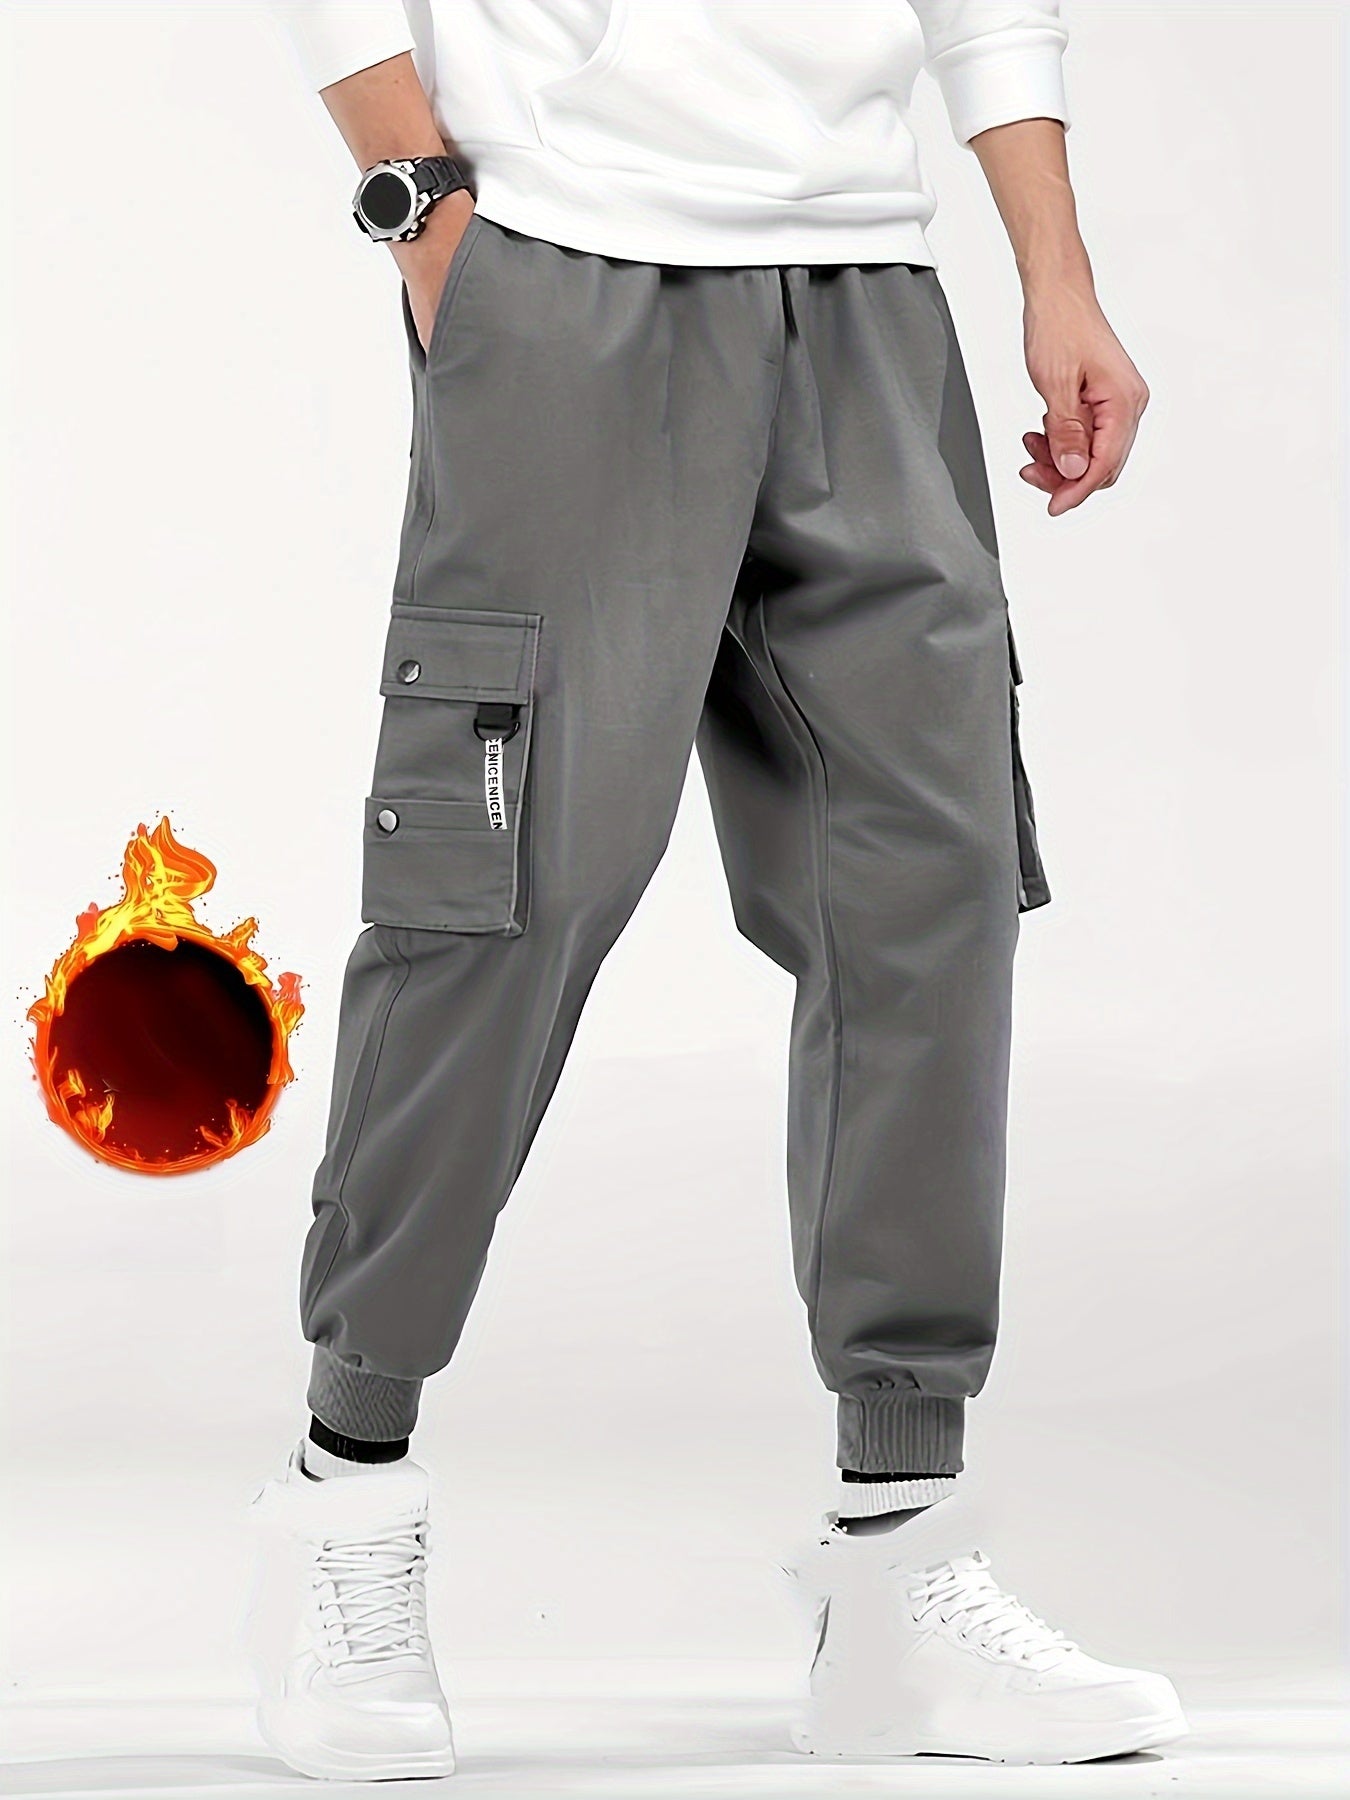 Classic Design Multi Pocket Cargo Pants, Men's Casual Loose Fit Drawstring Cargo Pants/Joggers For Spring Summer Outdoor